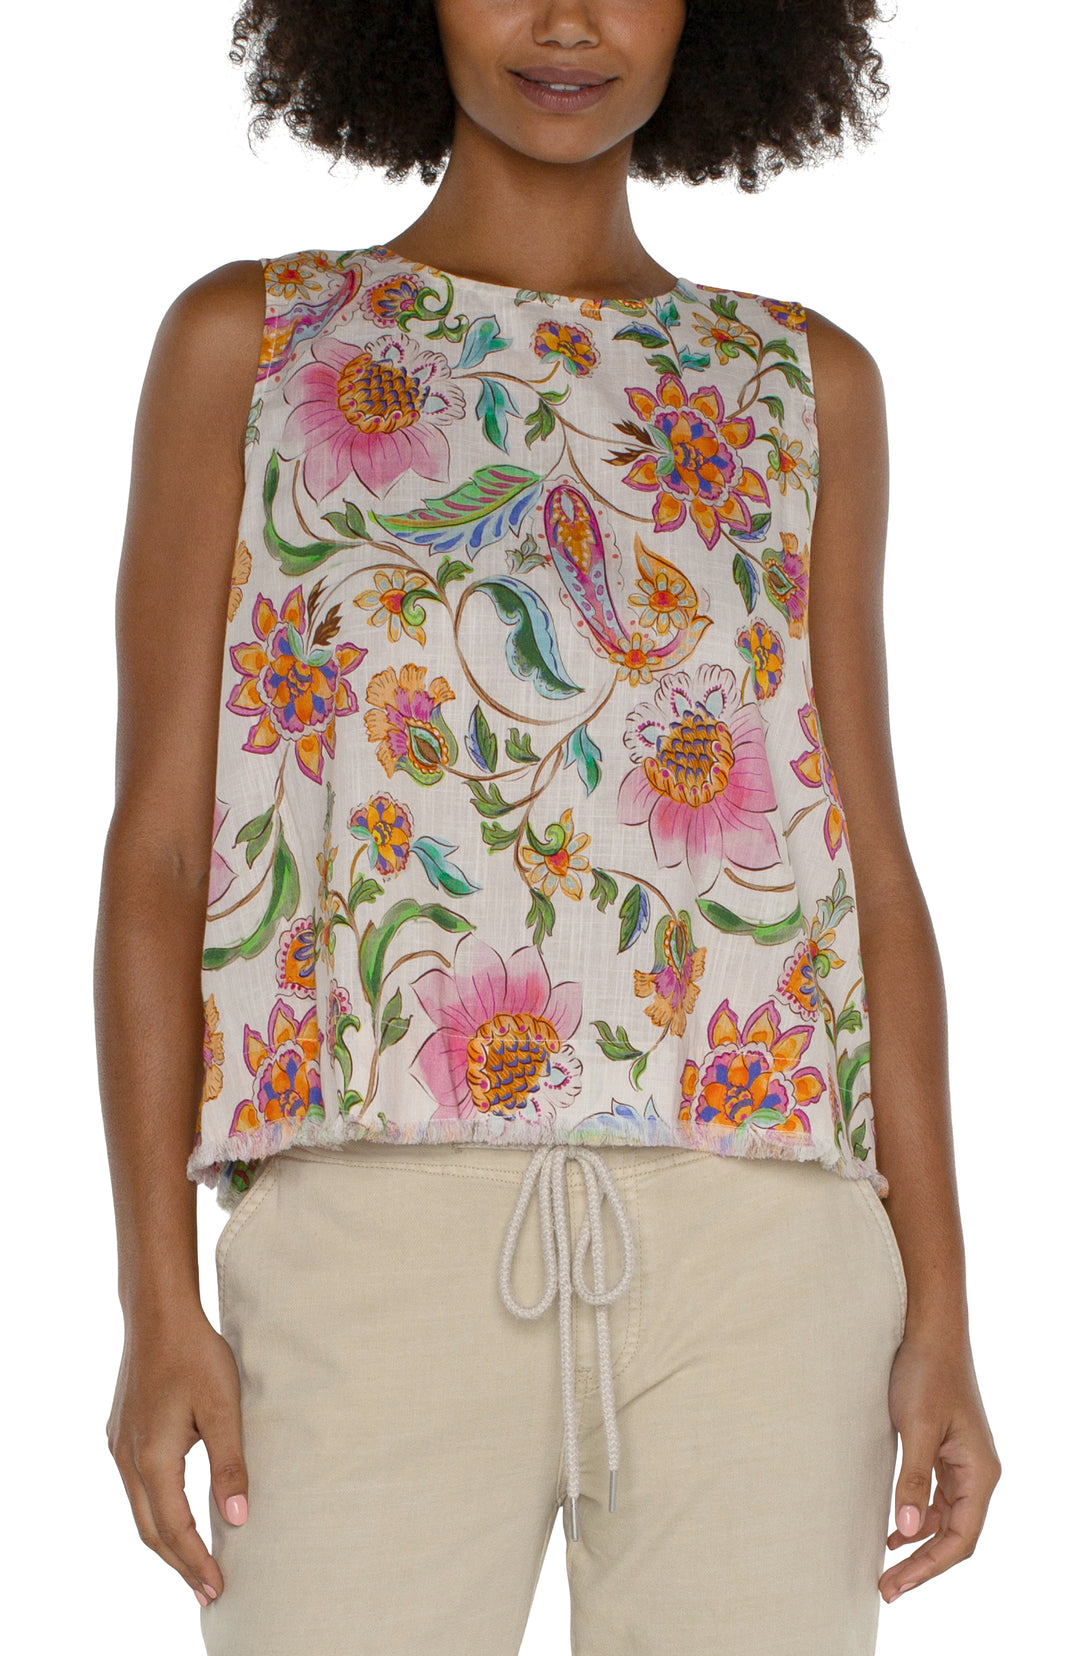 SLEEVELESS WOVEN TOP W/BUTTON BACK & FRAY HEM - PINK FLORAL